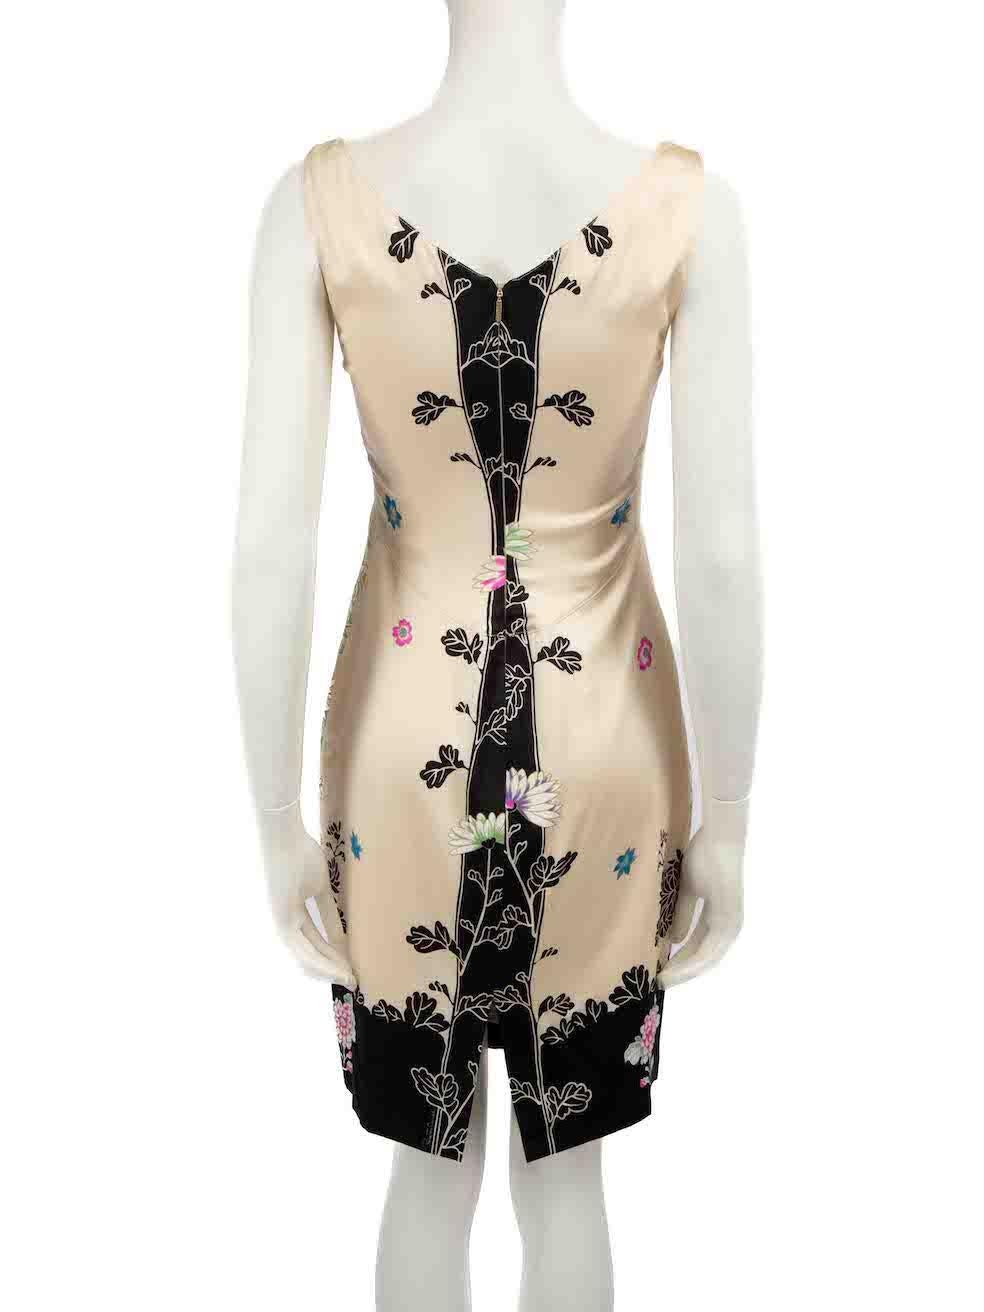 Roberto Cavalli Floral Print Lace Trim Mini Dress Size M In Good Condition For Sale In London, GB